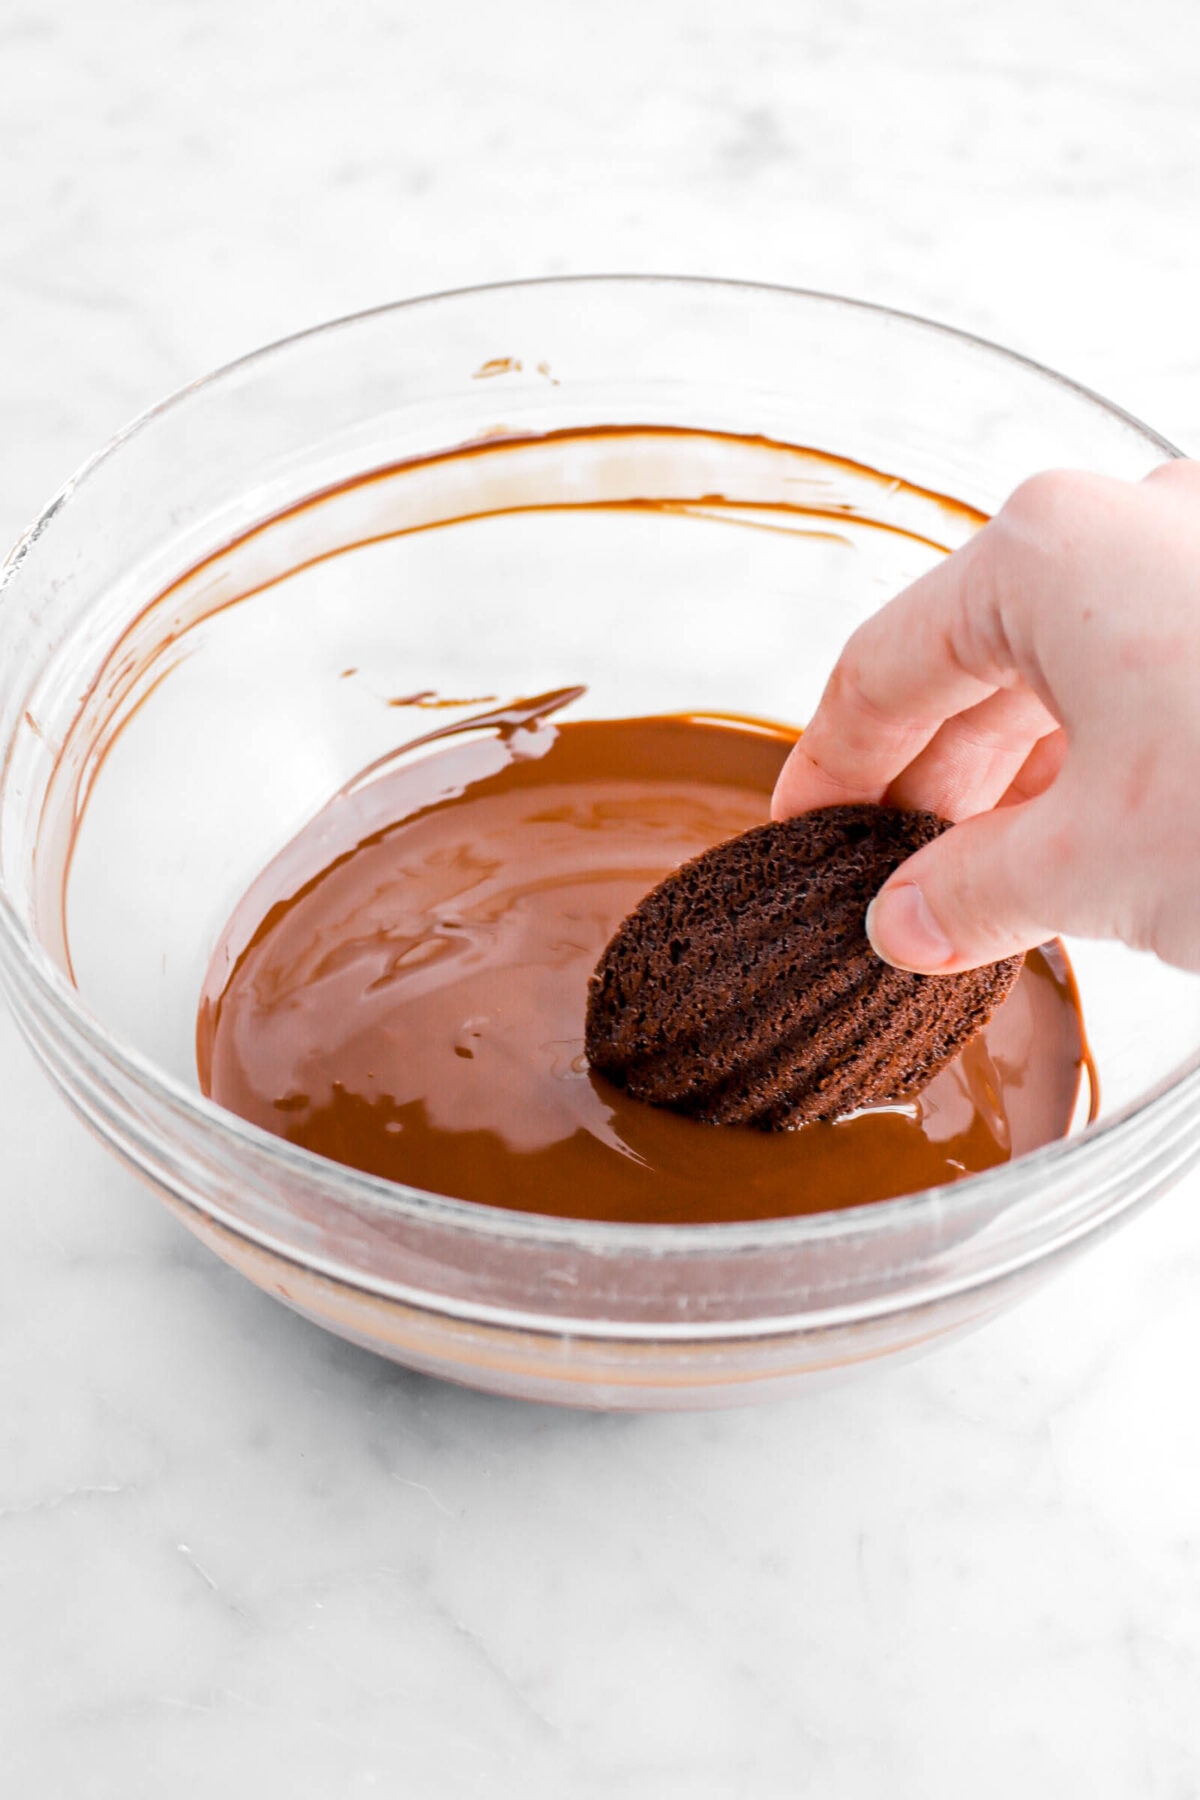 madeleine being dipped in melted chocolate.